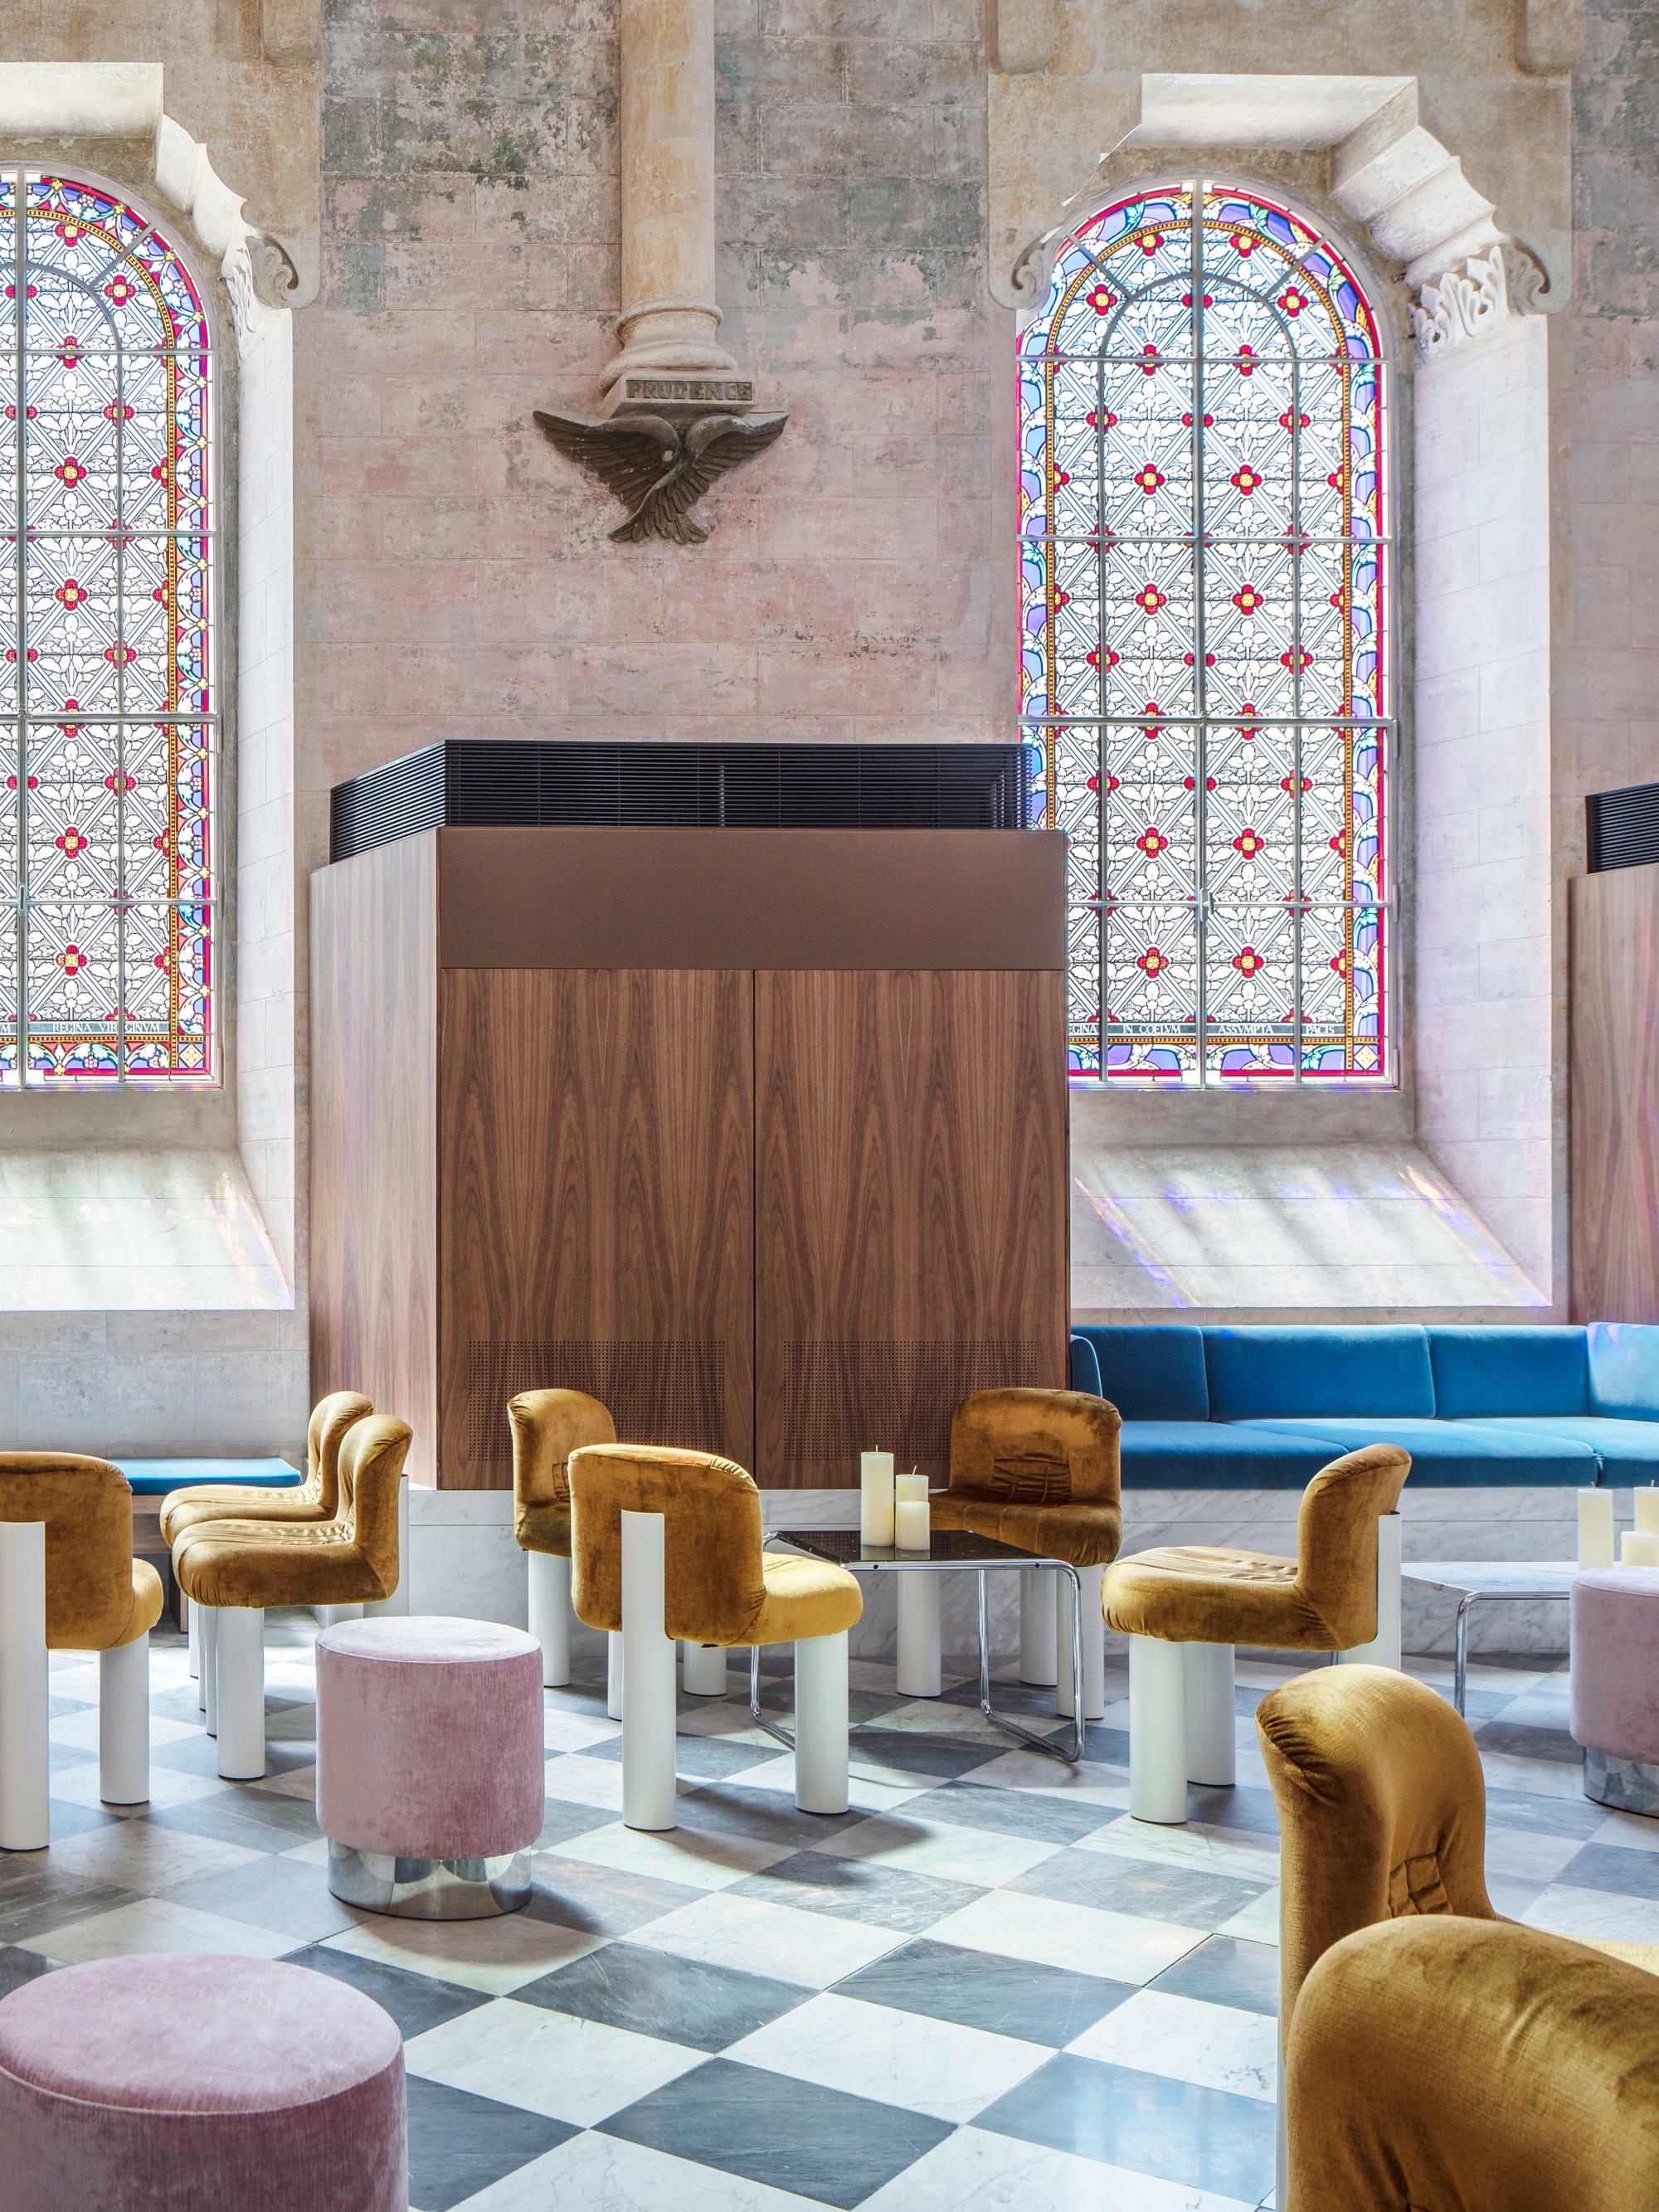 Plot Twist: This Insanely Cool Hotel Used to Be a Monastery